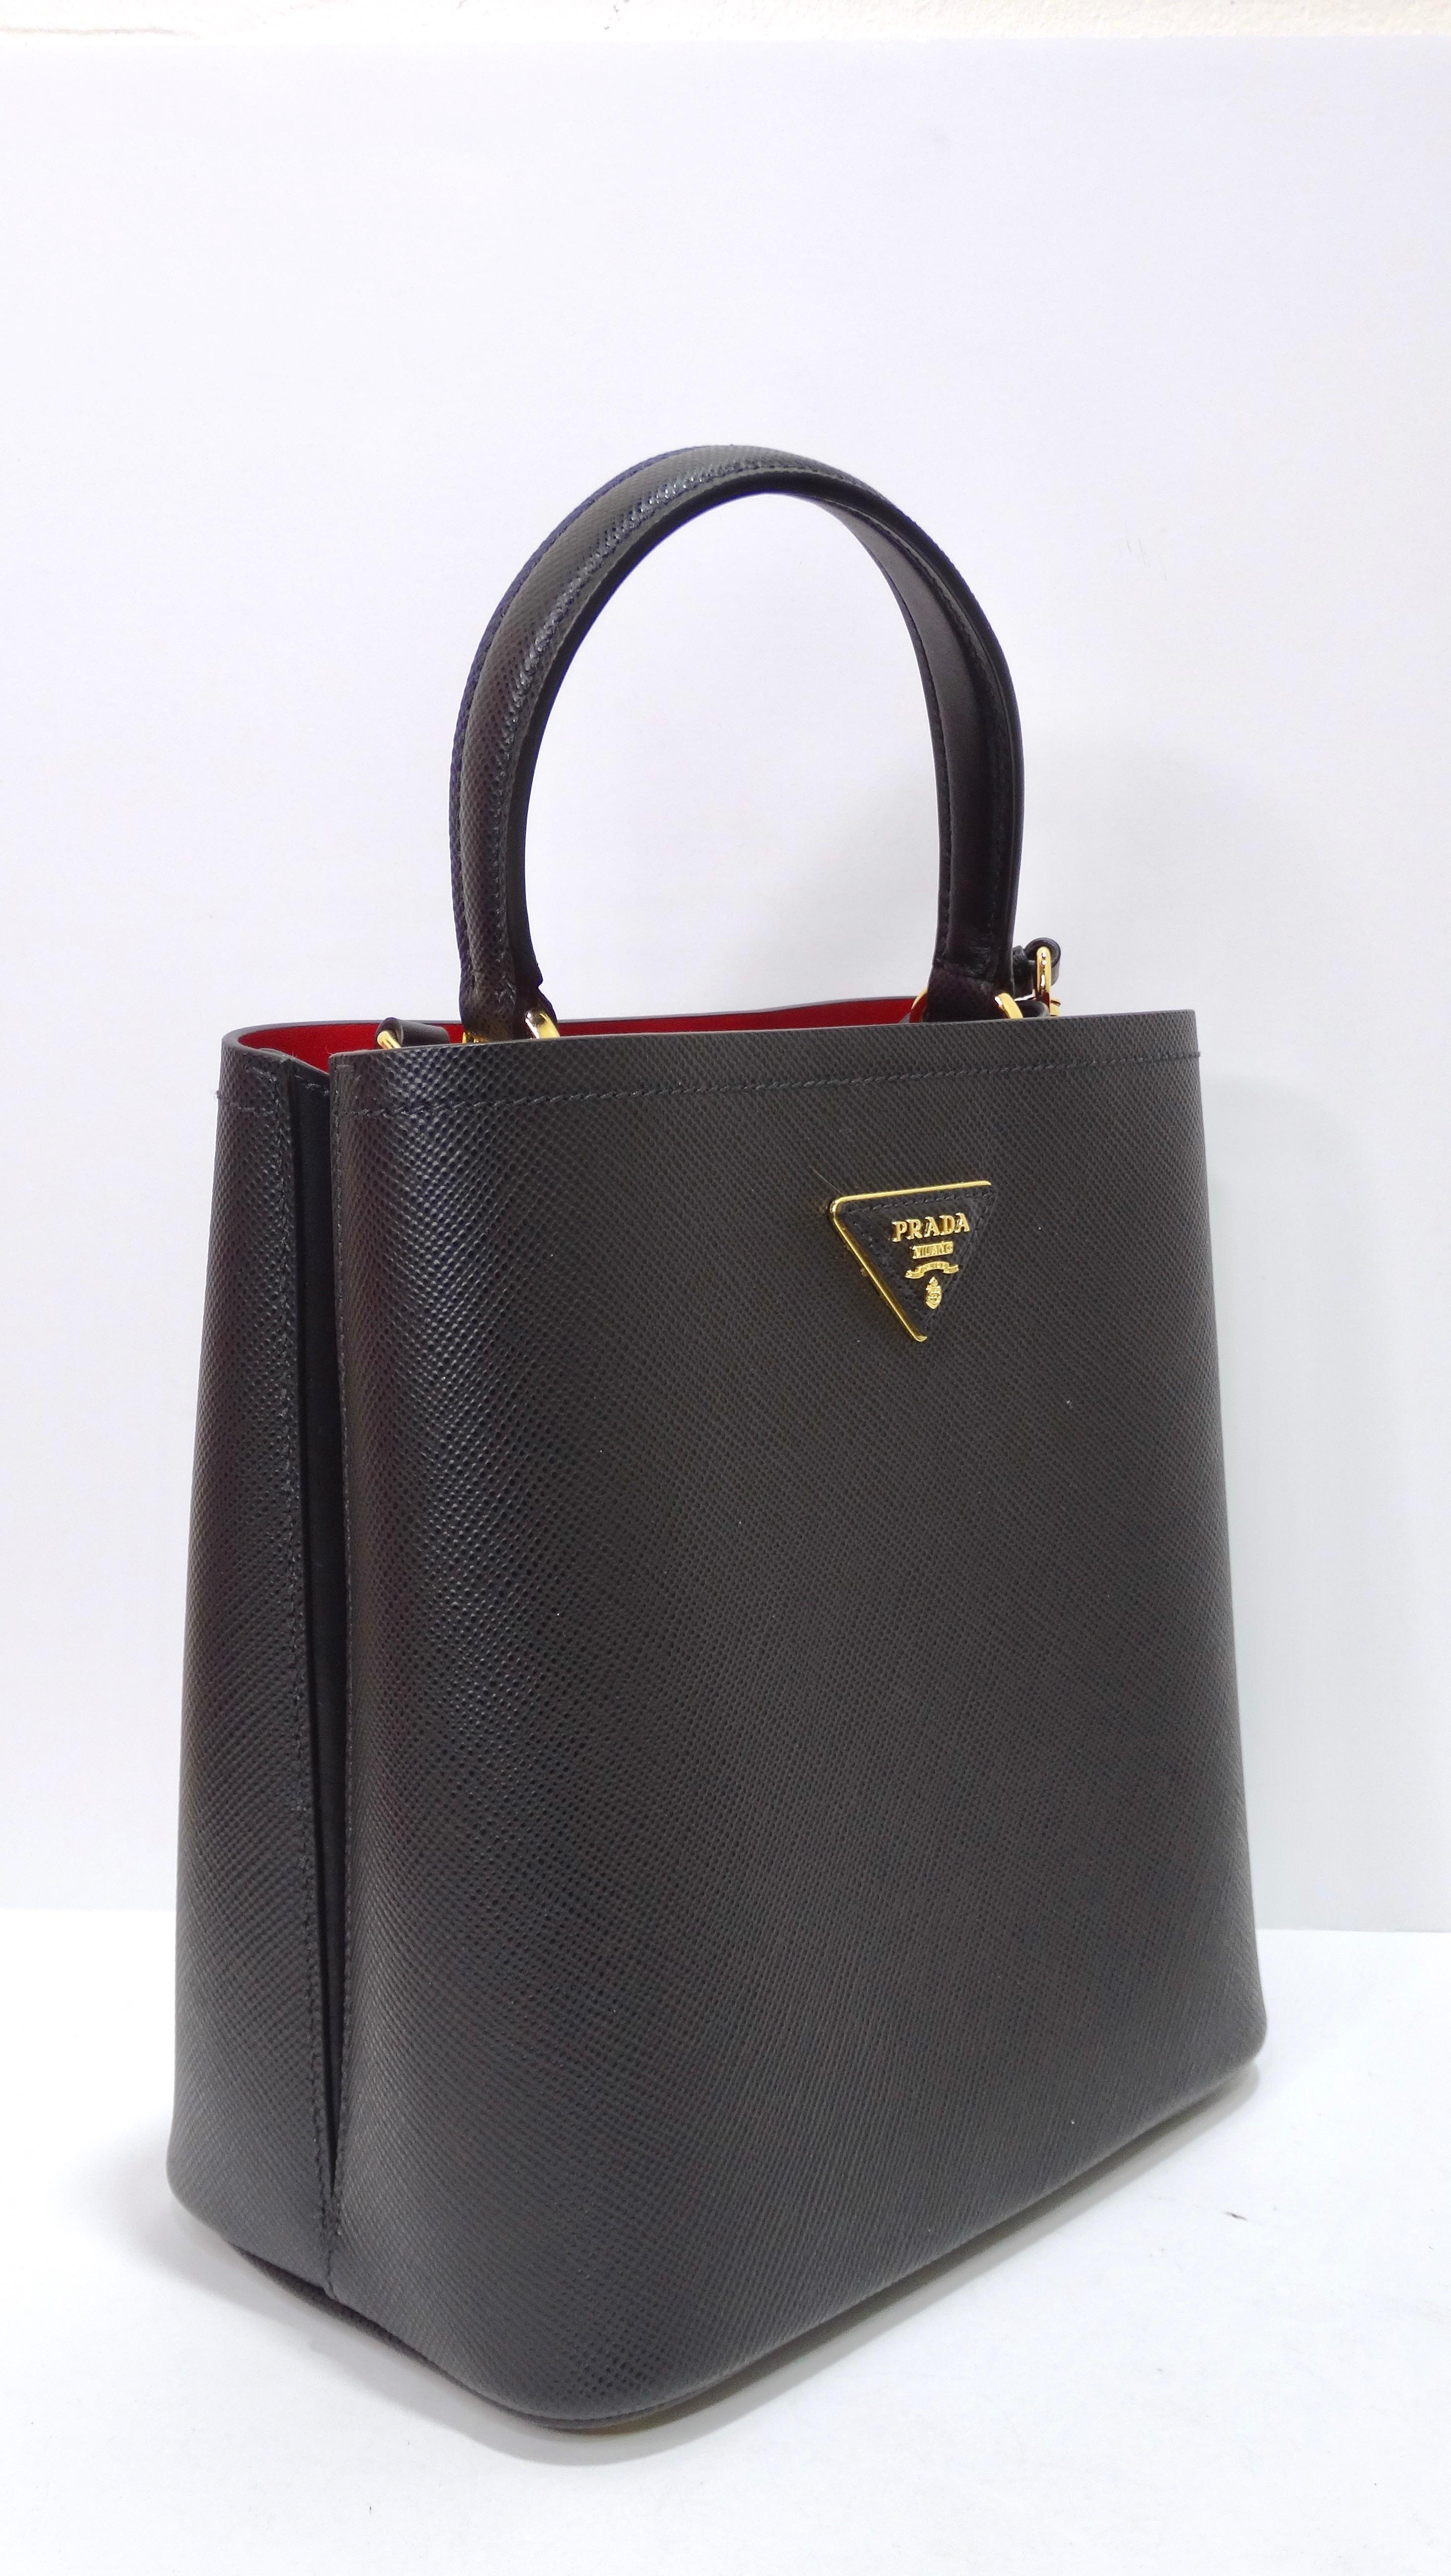 This is a sleek and essential handbag to add to your closet. Prada is known for their high quality leather goods that will never fail you. This bag features the iconic texture of Saffiano leather characterizes the compact Prada Panier bag. This is